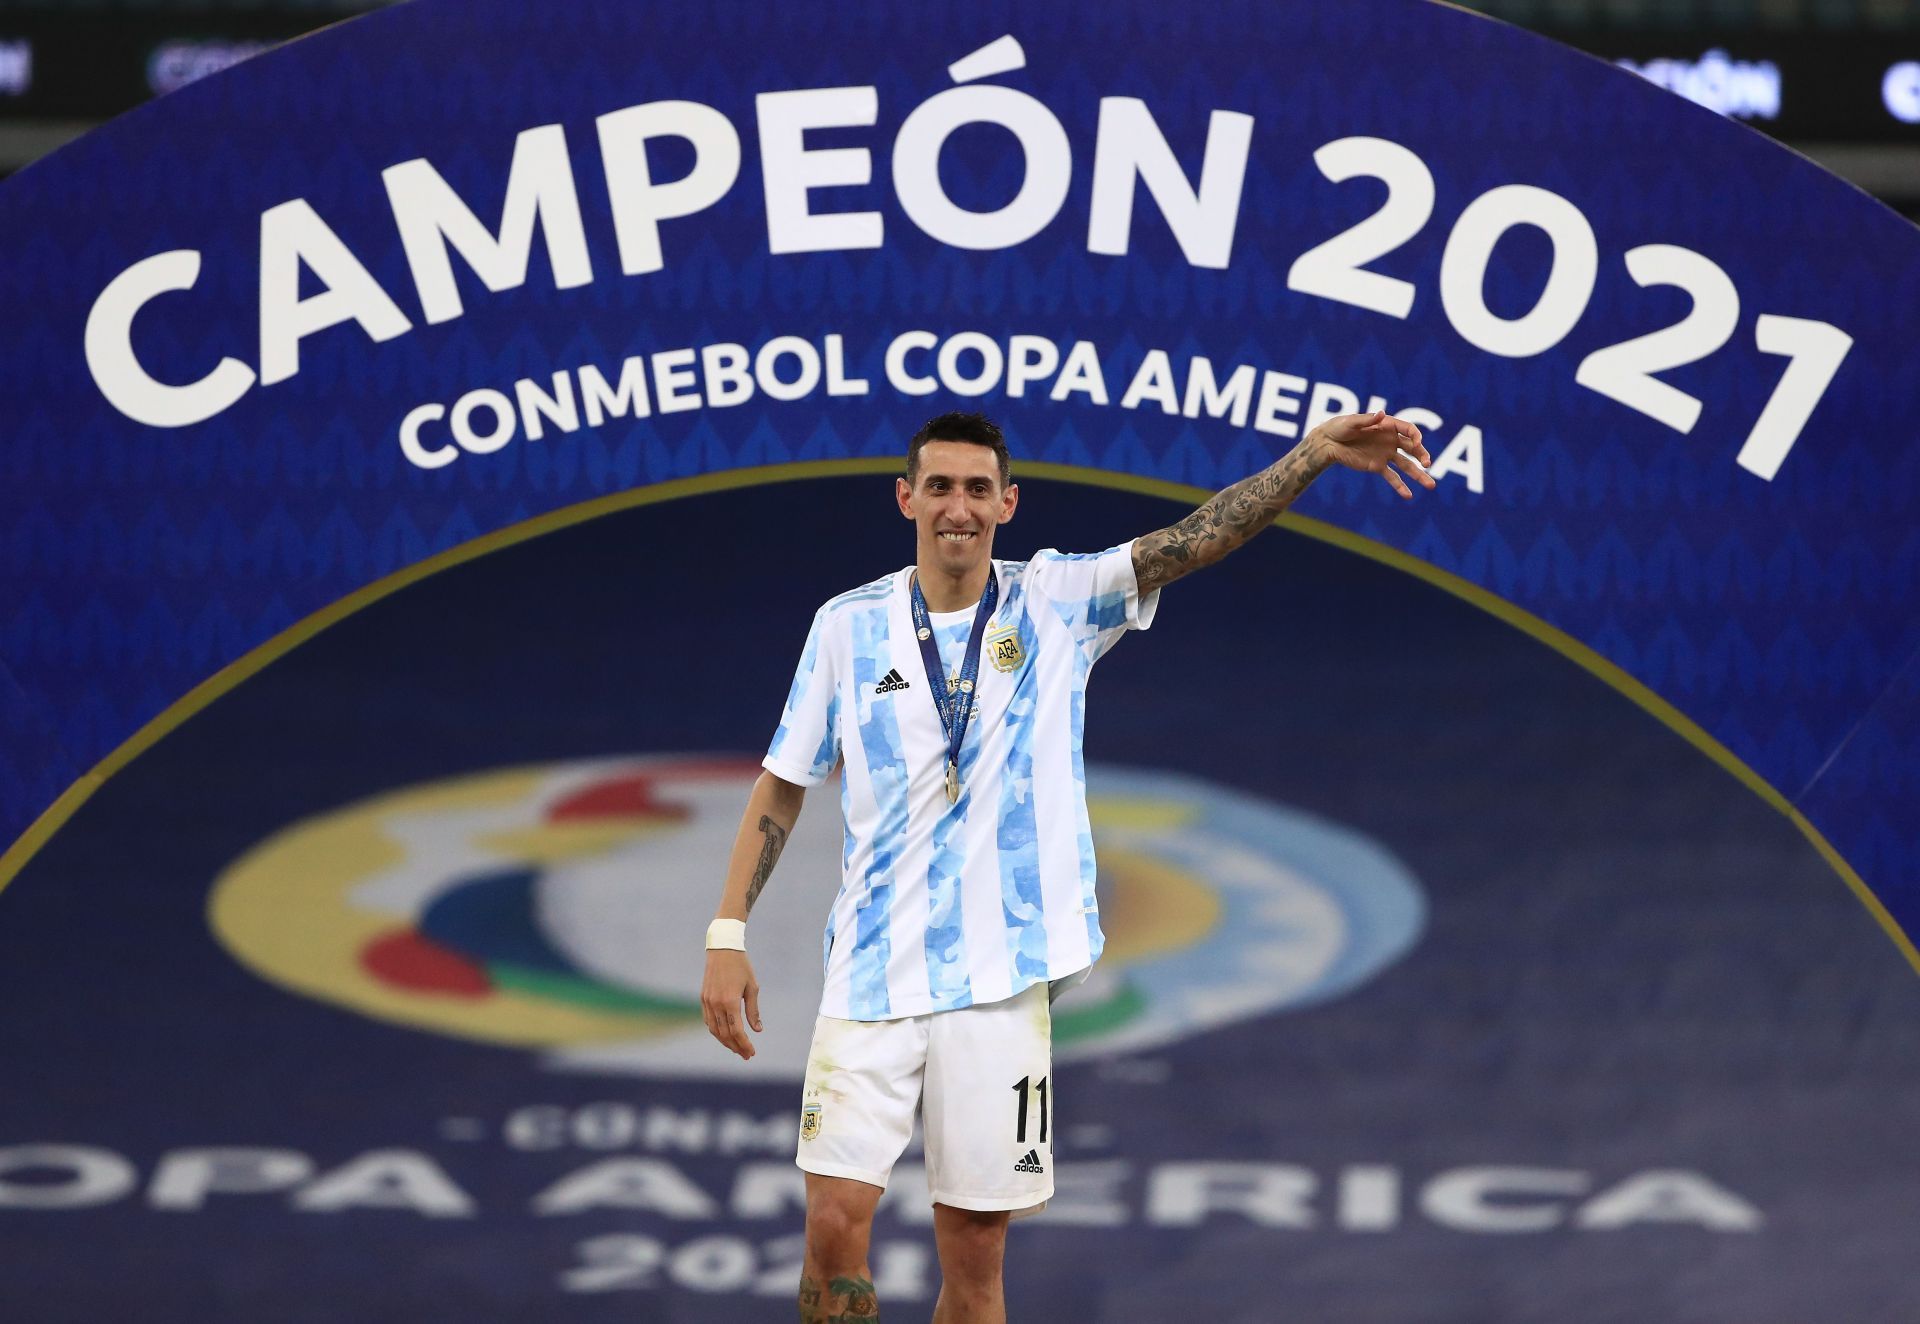 Angel Di Maria won the Copa America 2021 title with Argentina after a long wait